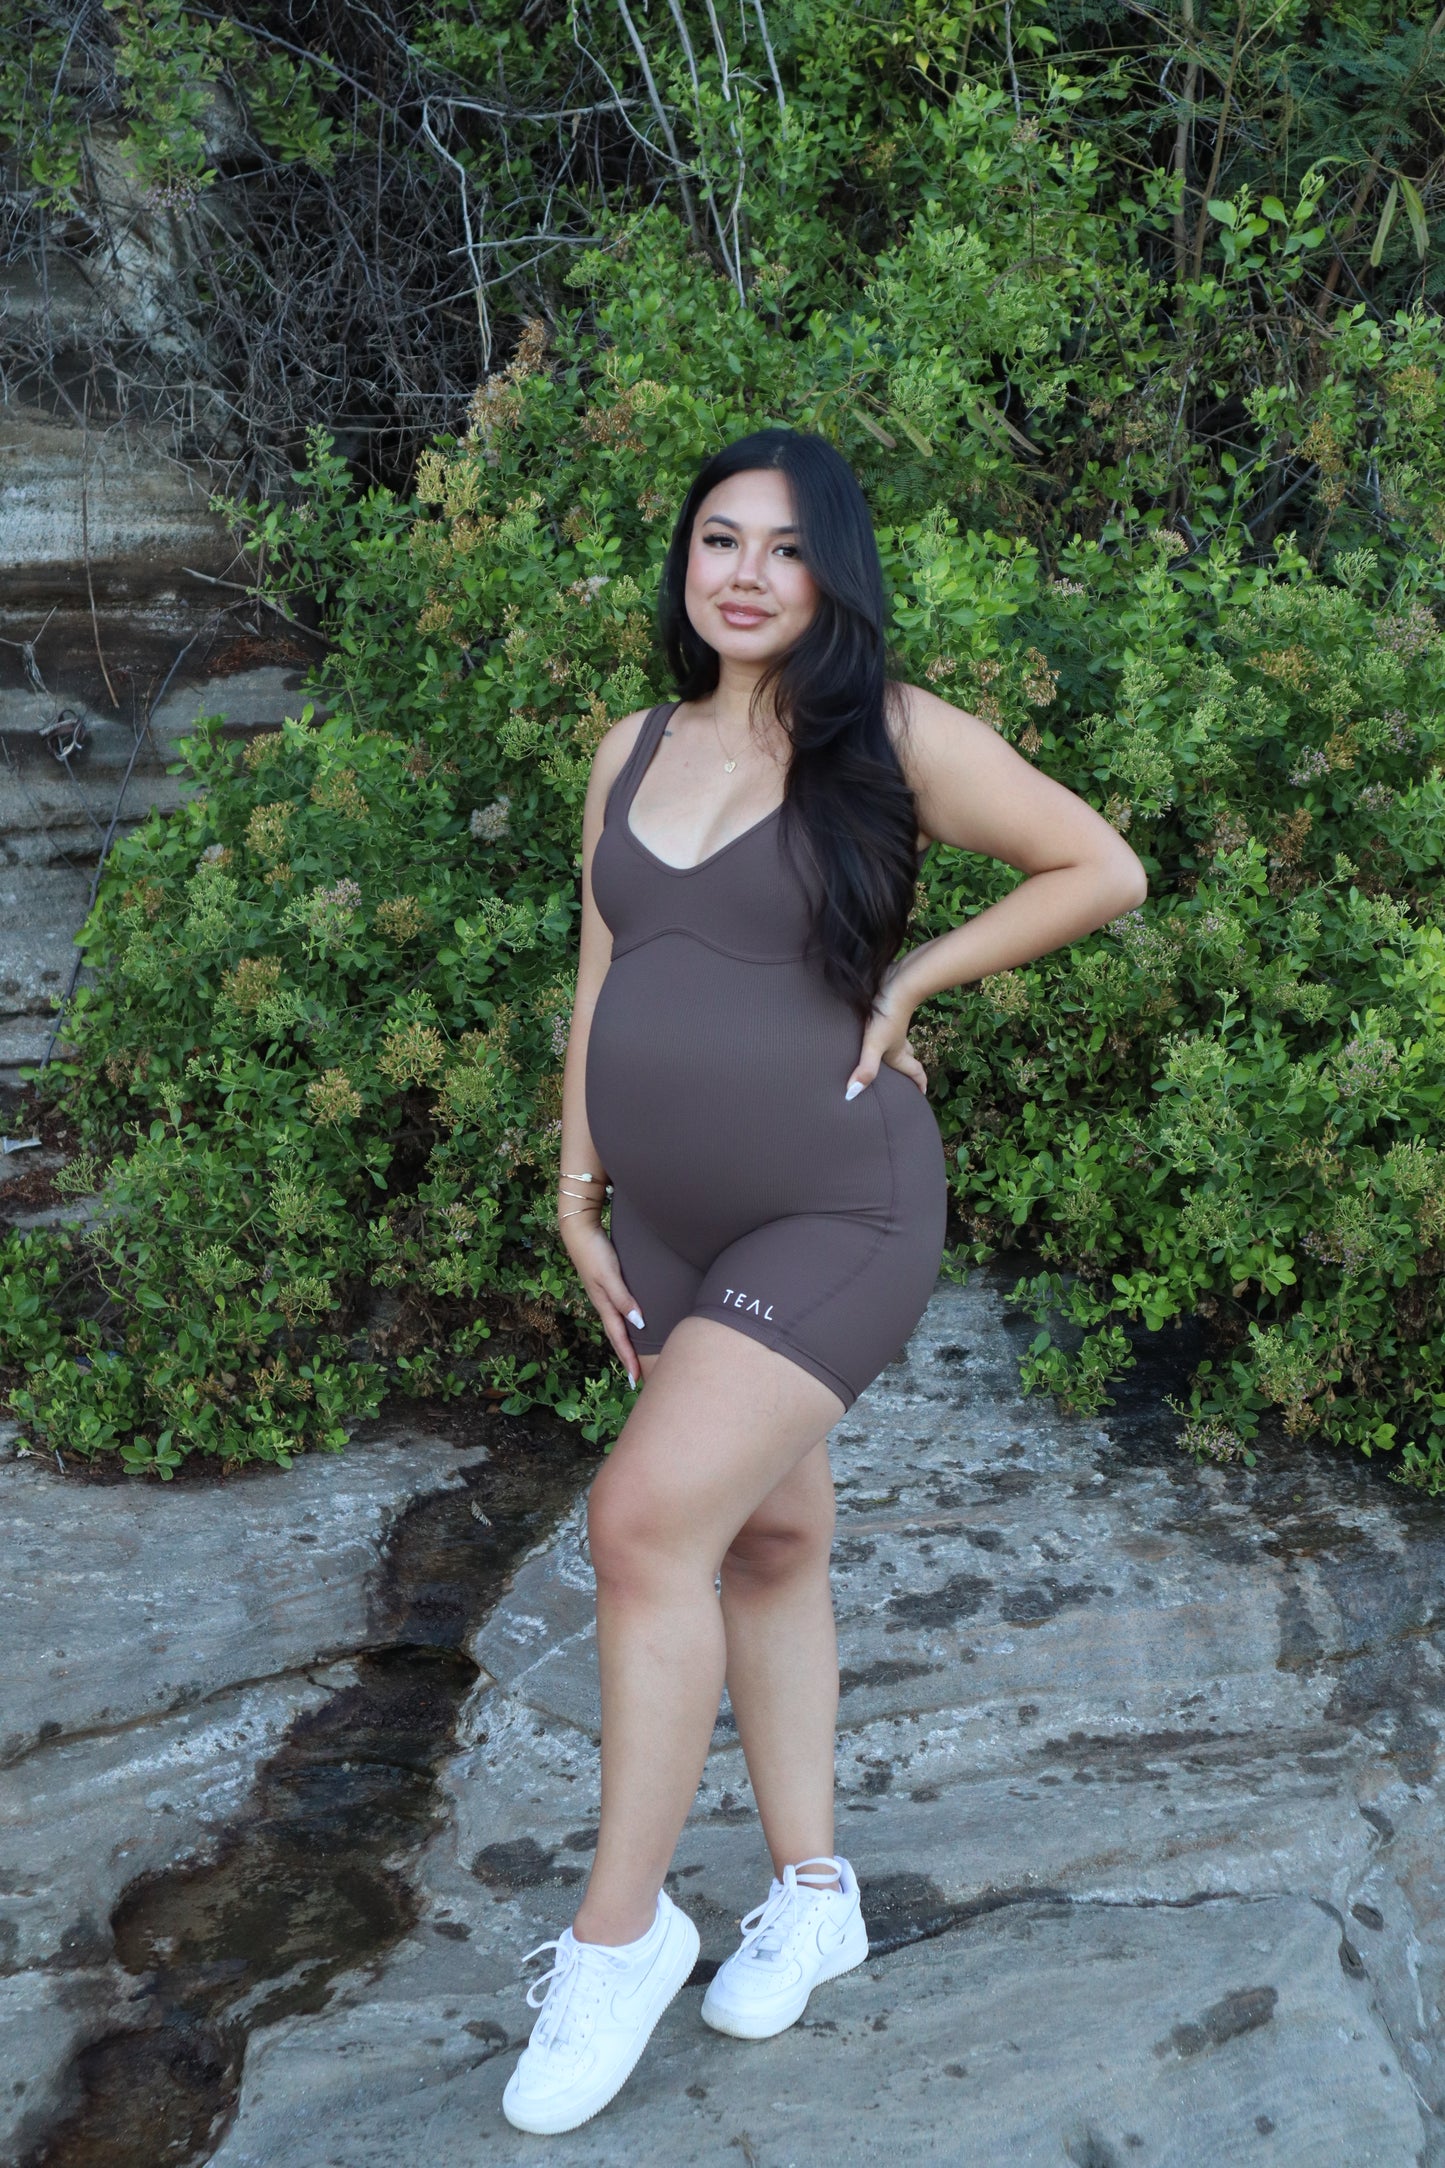 RIBBED AURA 4" JUMPSUIT in MOCHA